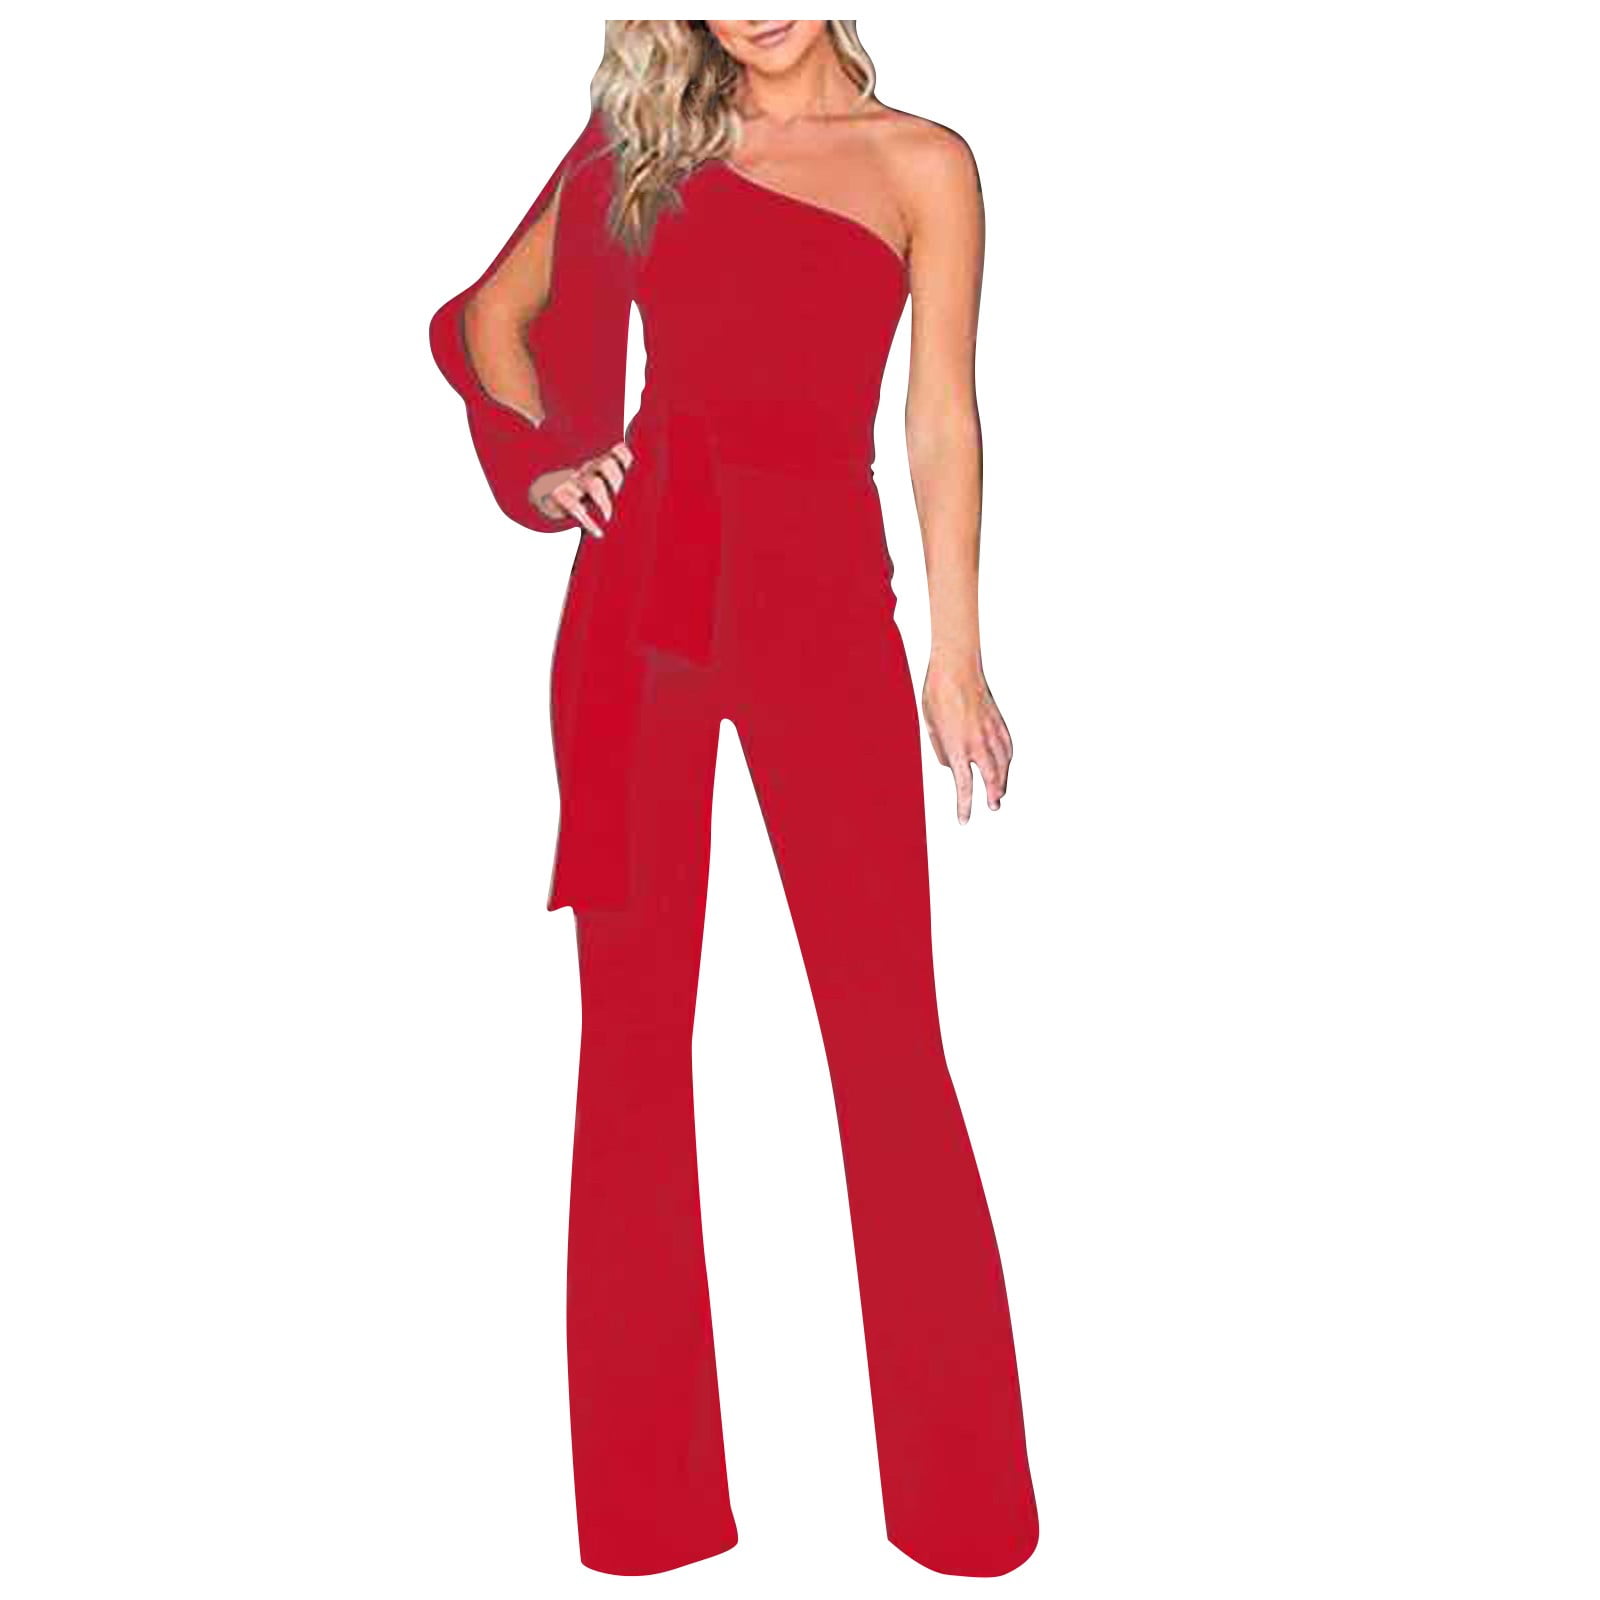 Jumpsuits For Women, Long Rompers For Women, Floral Jumpsuits For Women ...